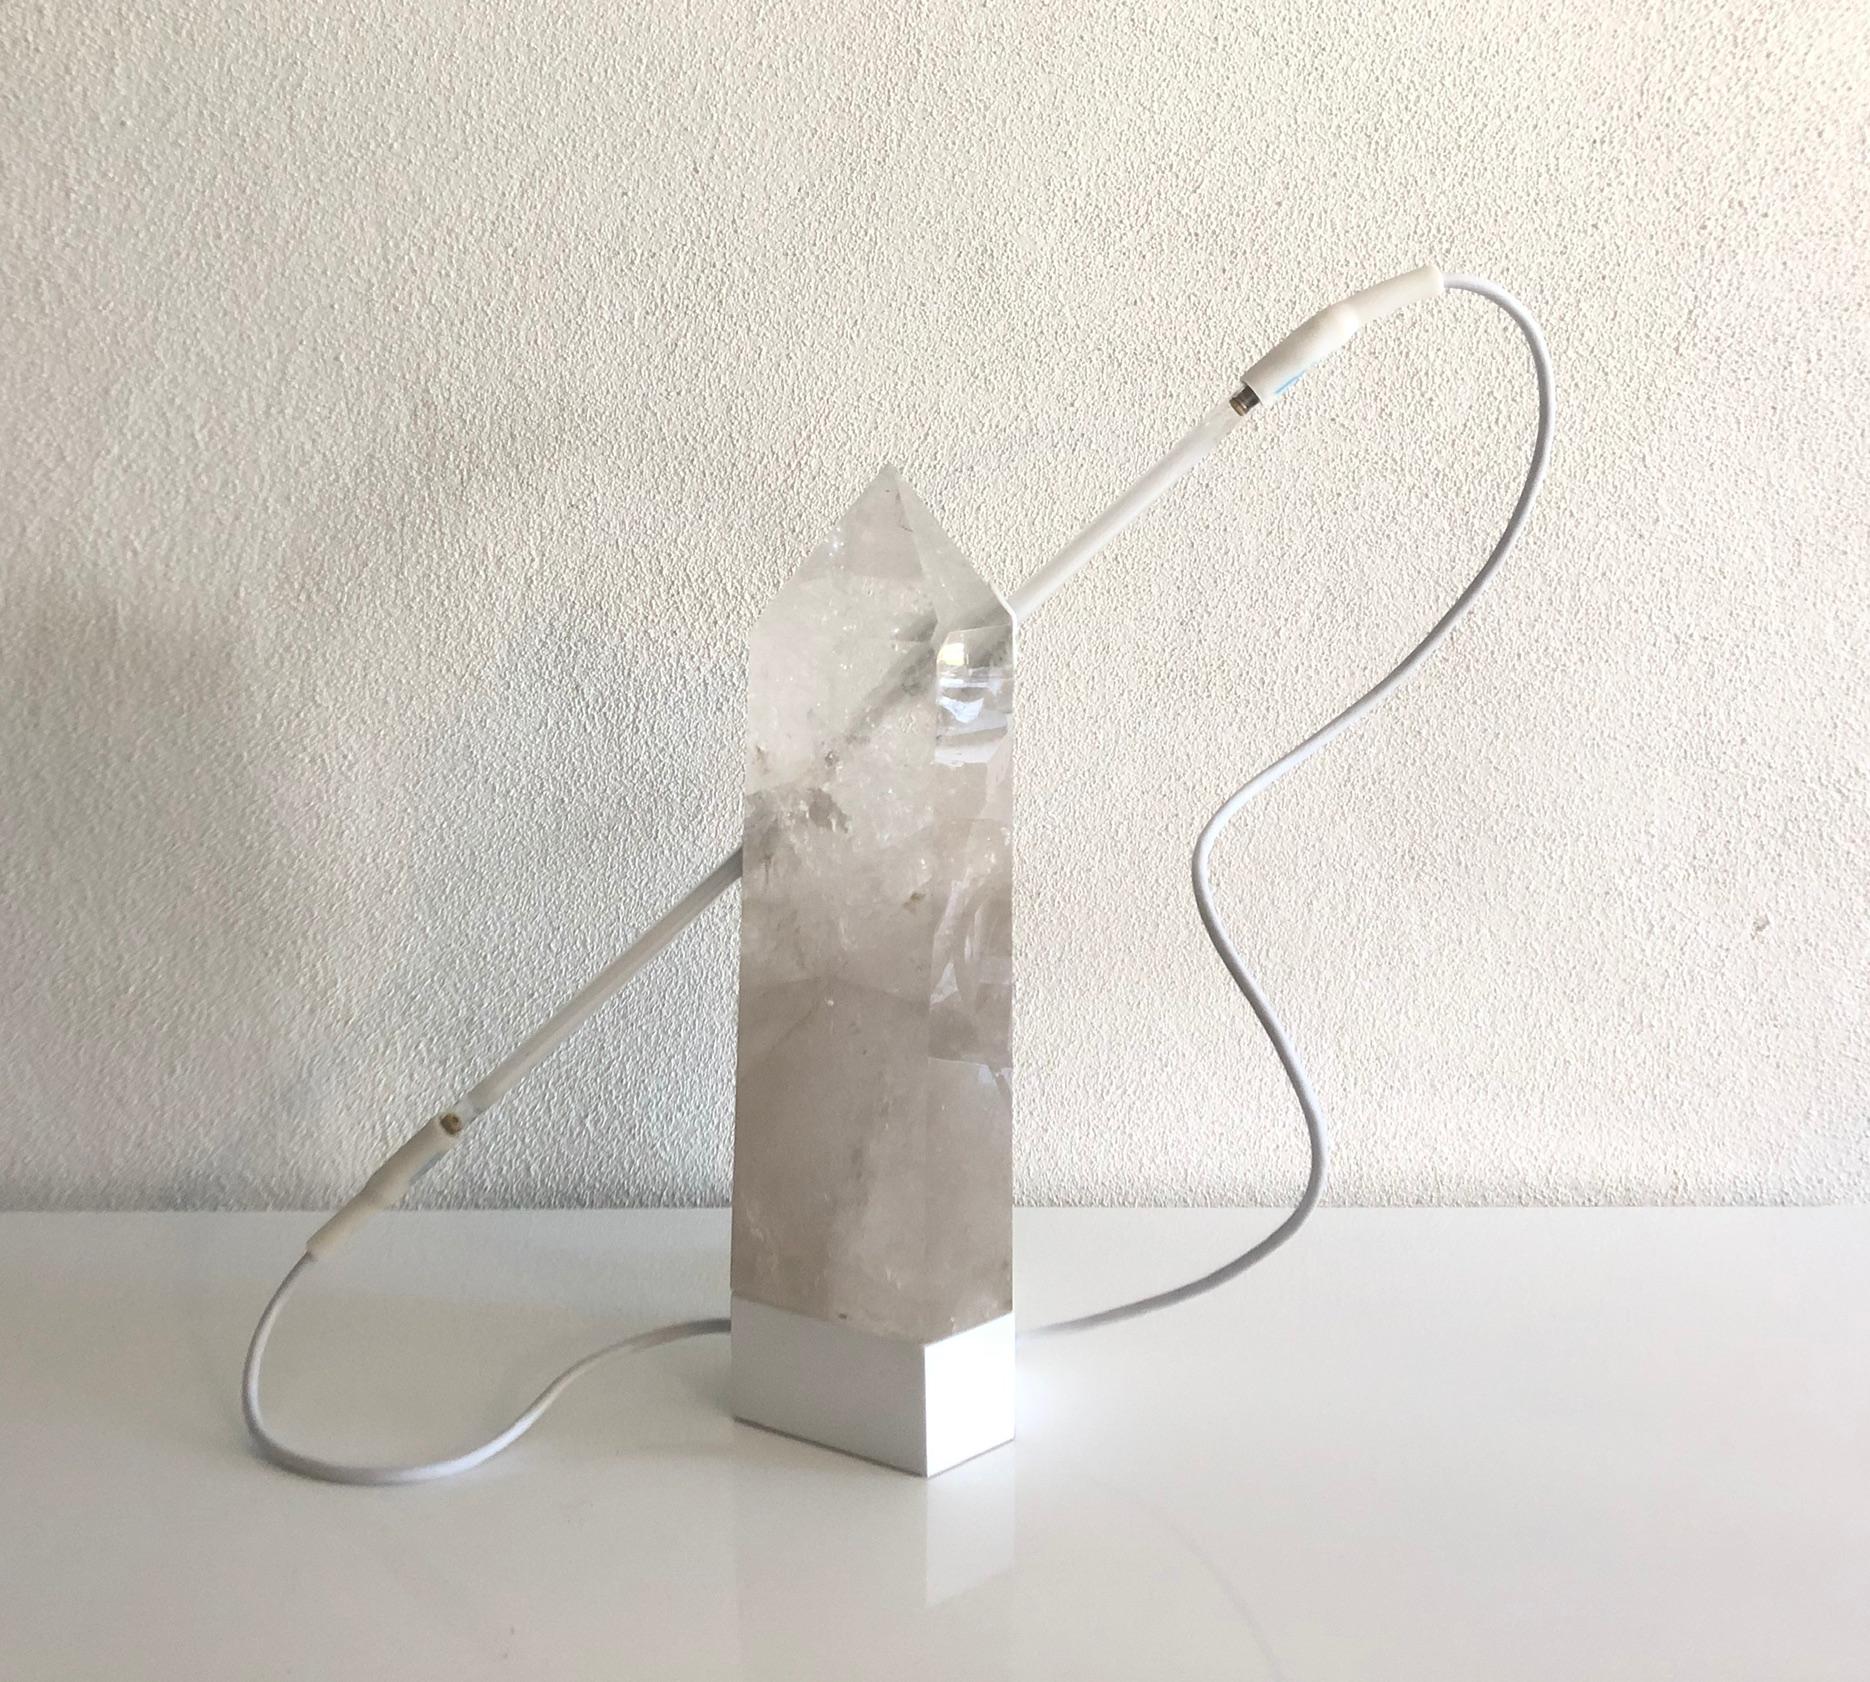 ‘GALACTIC RECEPTOR’ is a sculptural table lamp using quartz crystal as the body then pierced with a millennial pink neon tube. When powered off the piece is entirely white. When ignited the neon creates a spectacle of other worldly glowing light